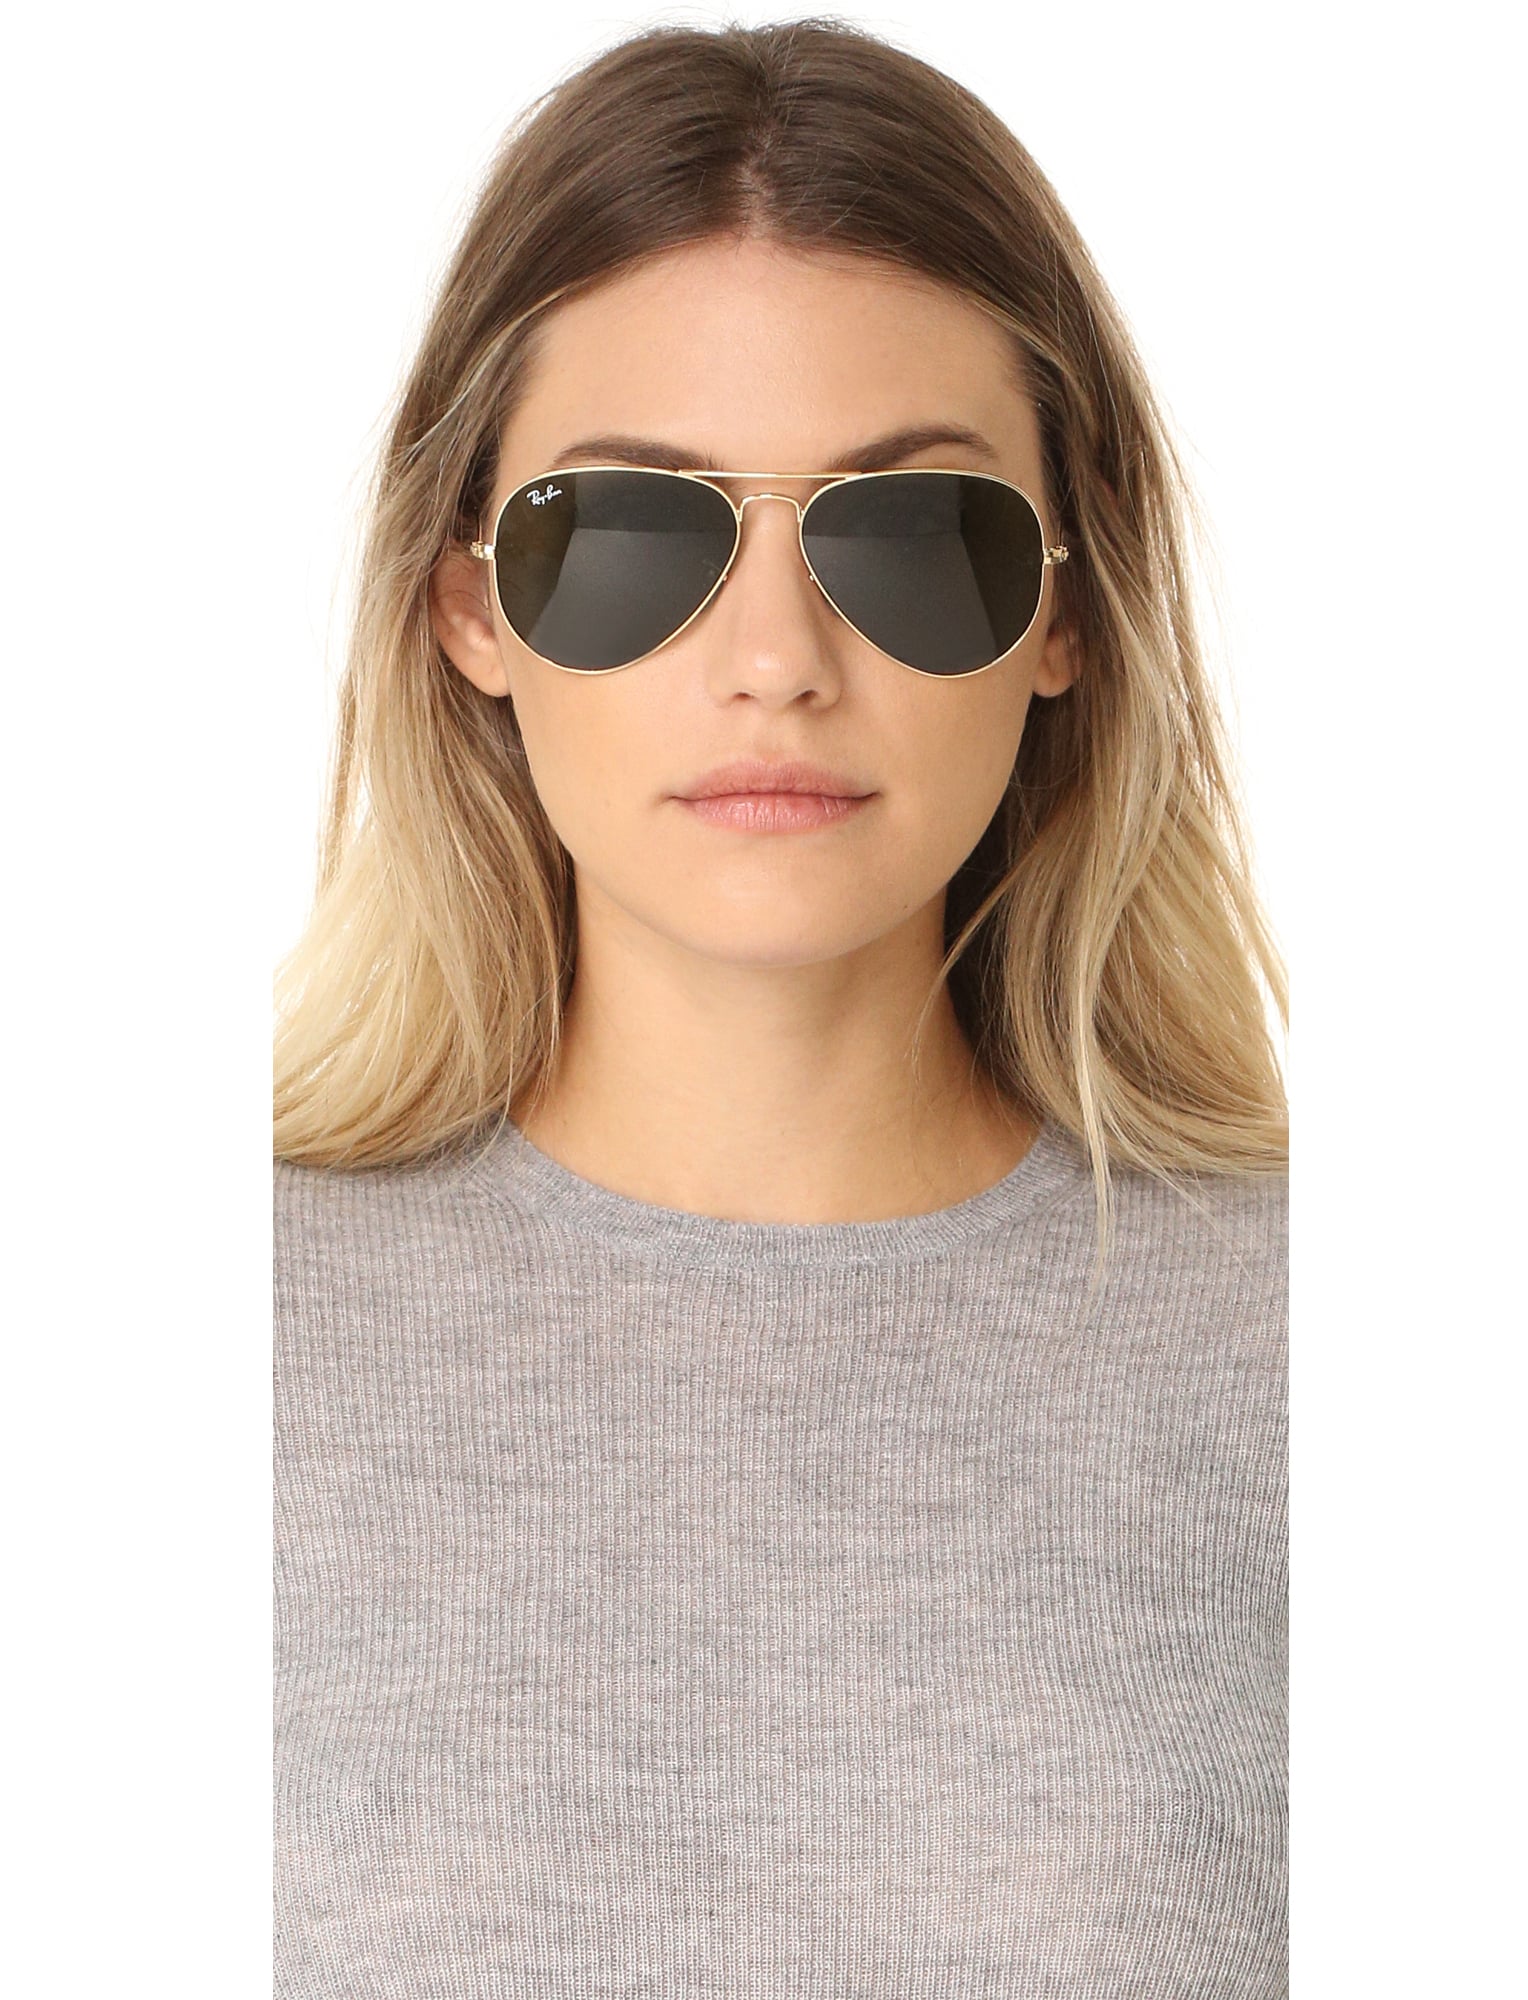 Ray-Ban Original Aviator Sunglasses | 22 Unisex Fashion Gifts For Any Human  in Your Life | POPSUGAR Fashion Photo 14